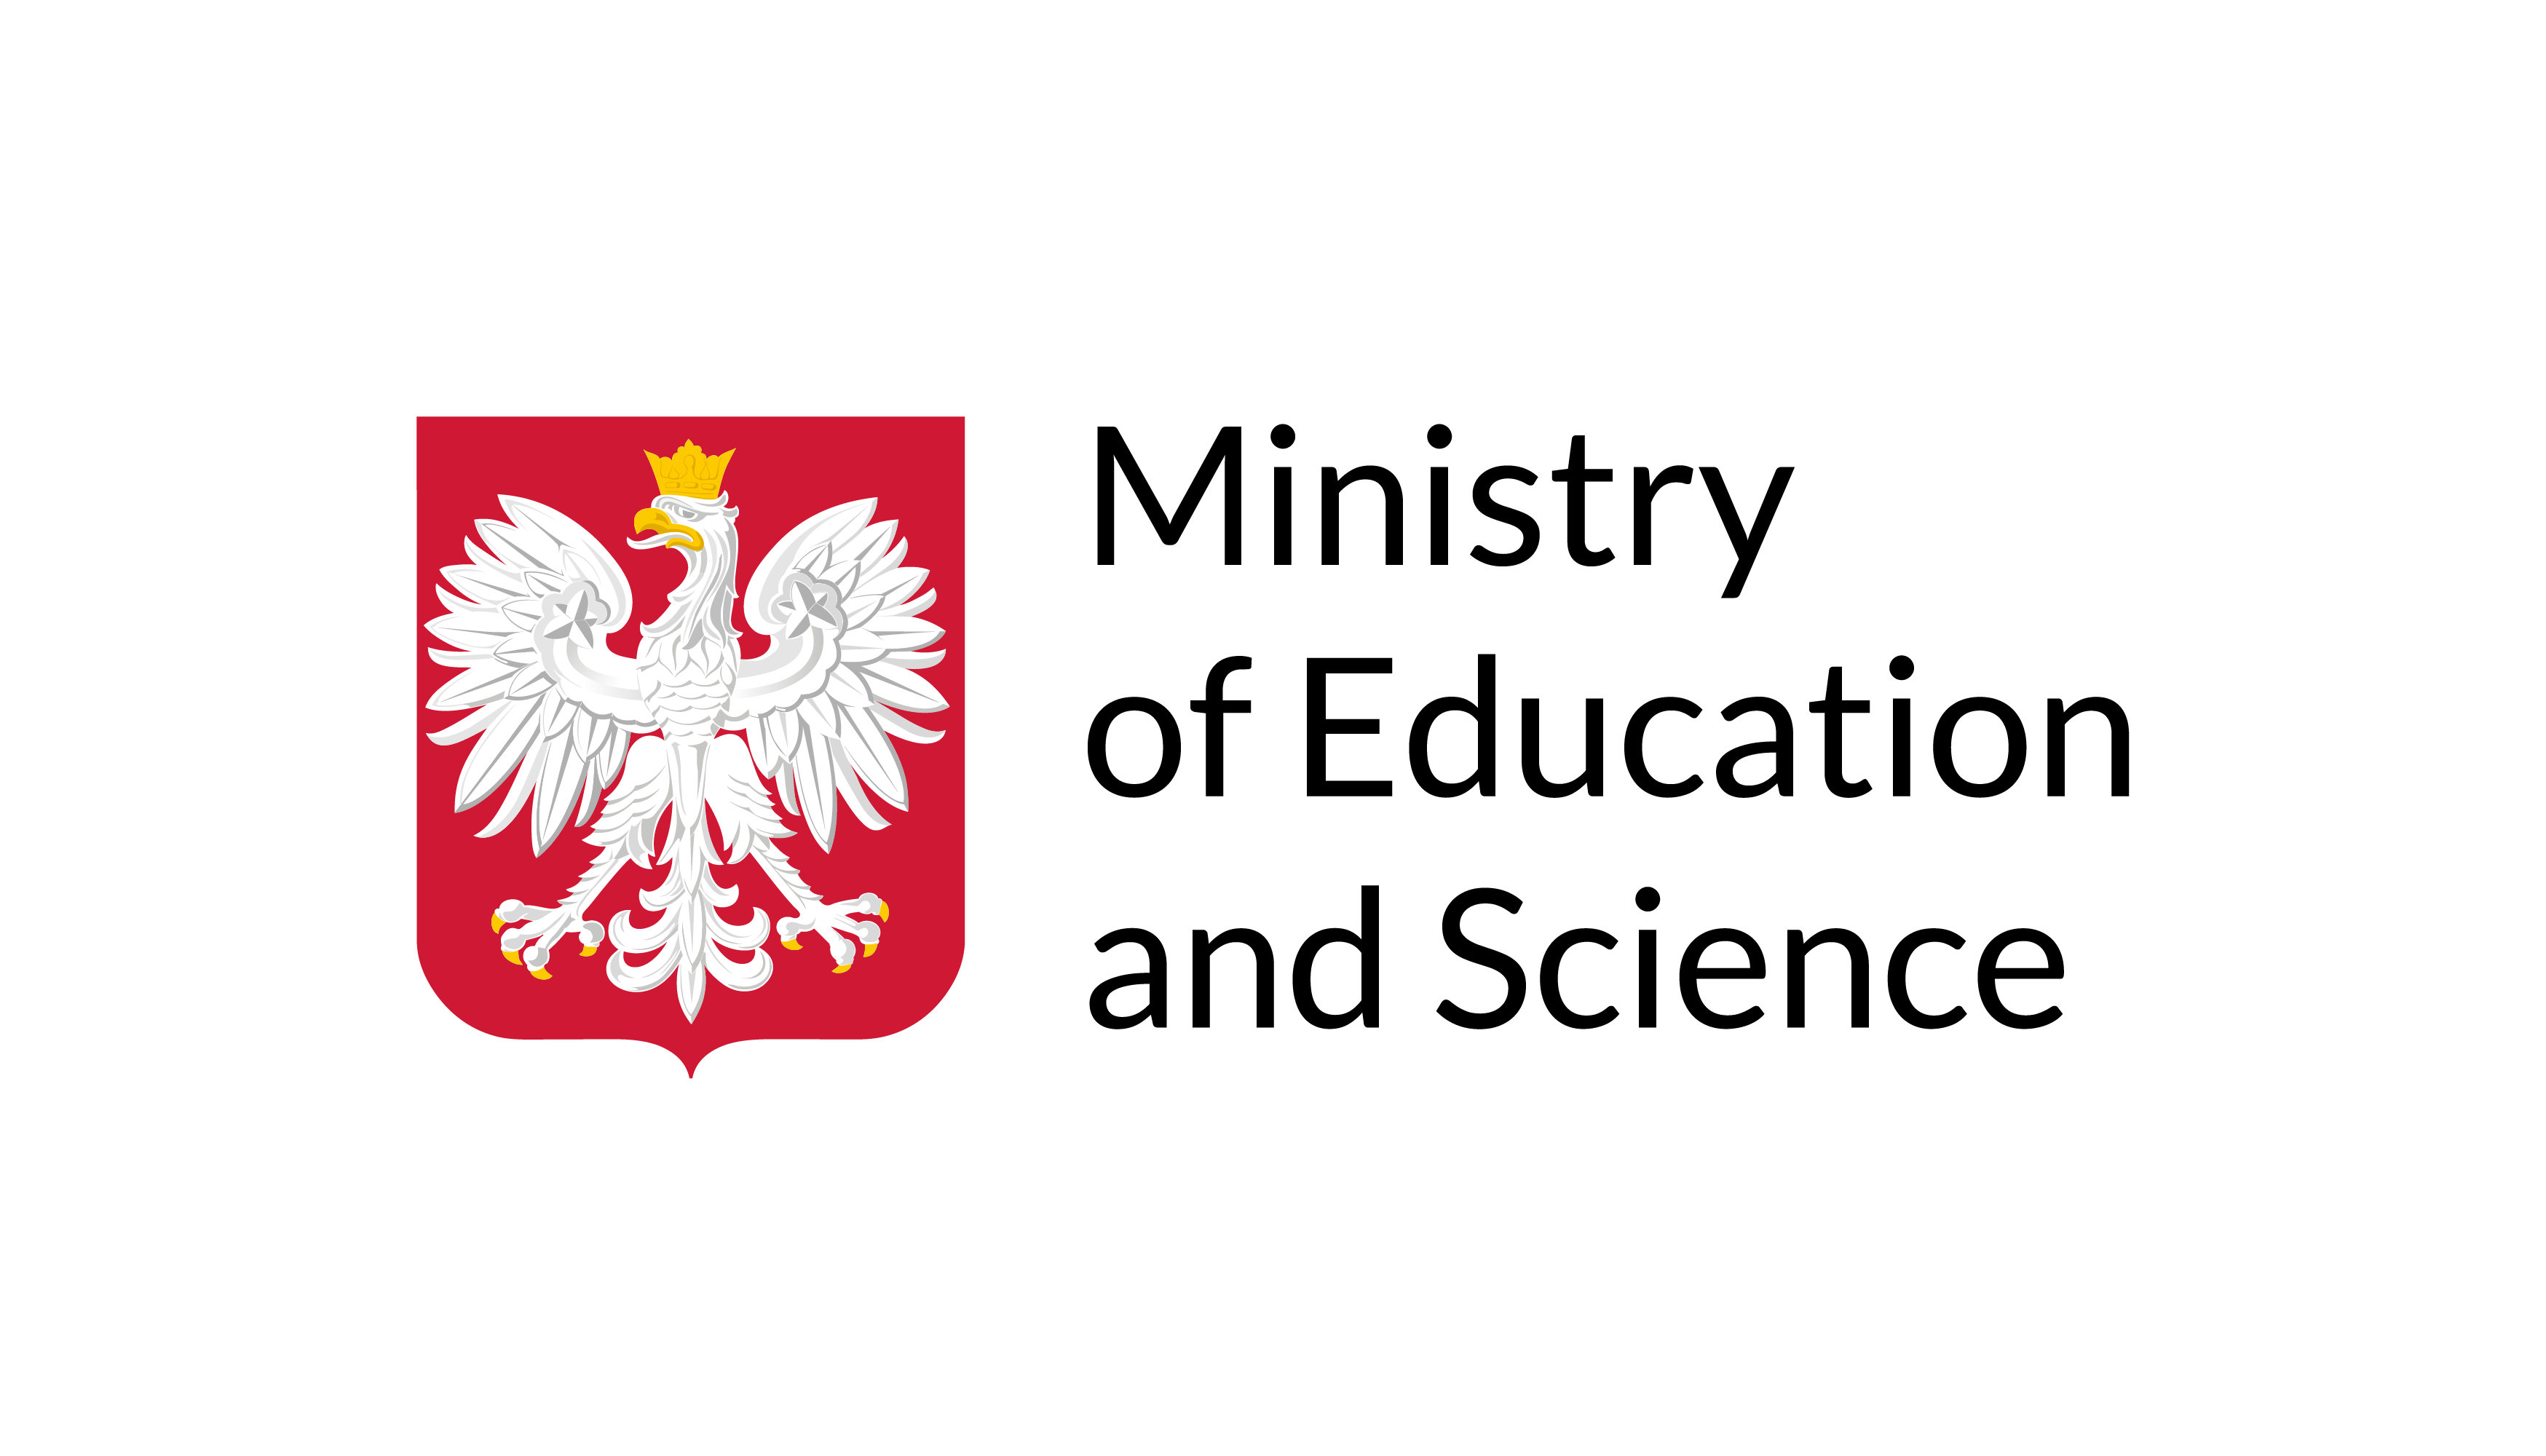 Ministry of Education and Science logo